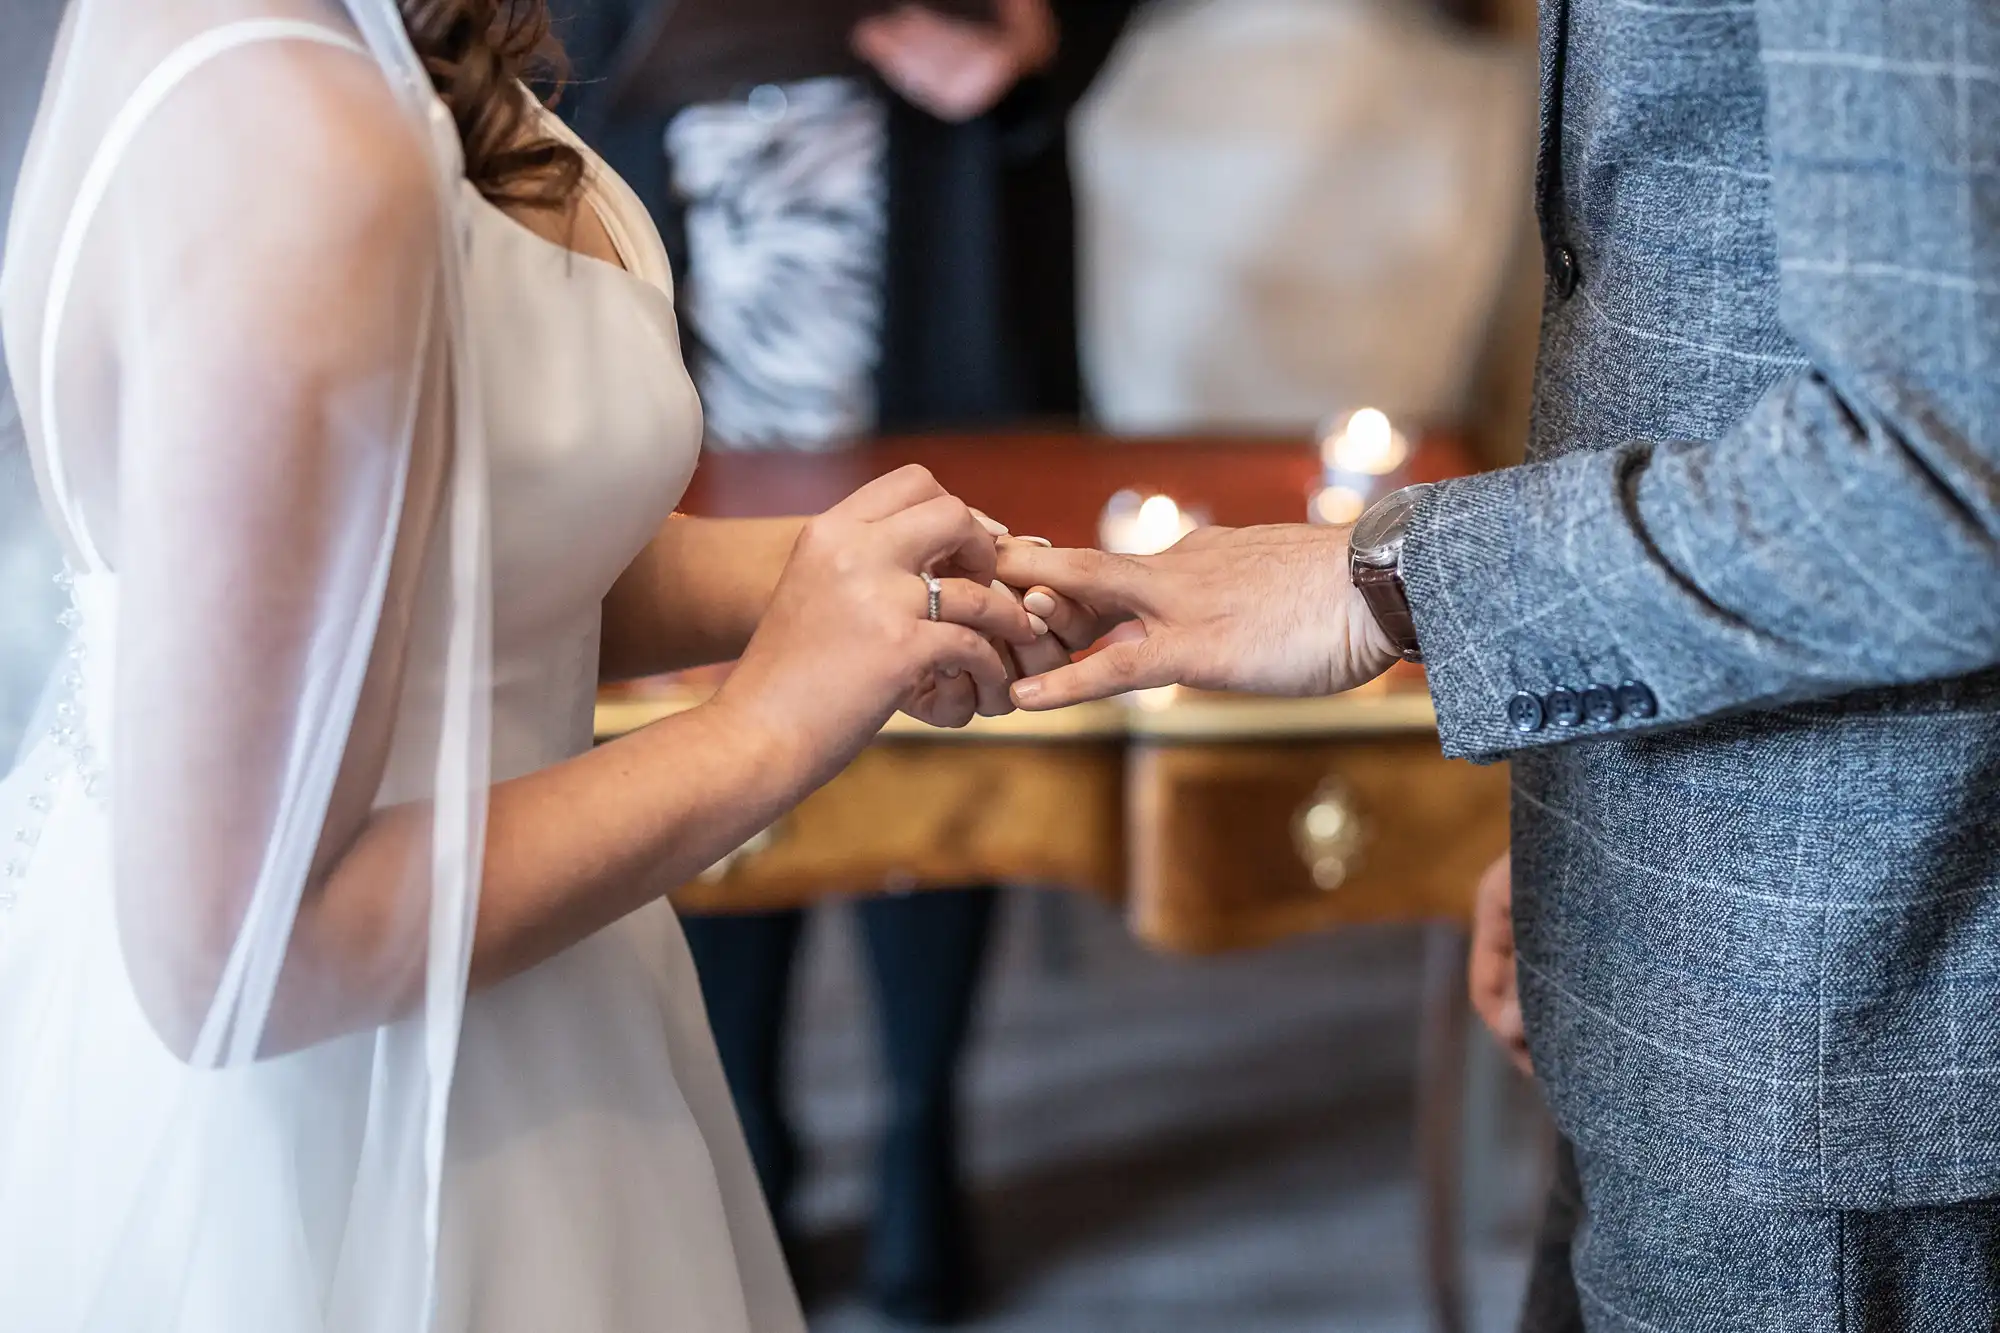 Bride placing a wedding ring on groom's finger during ceremony, close-up of hands with candles in background.